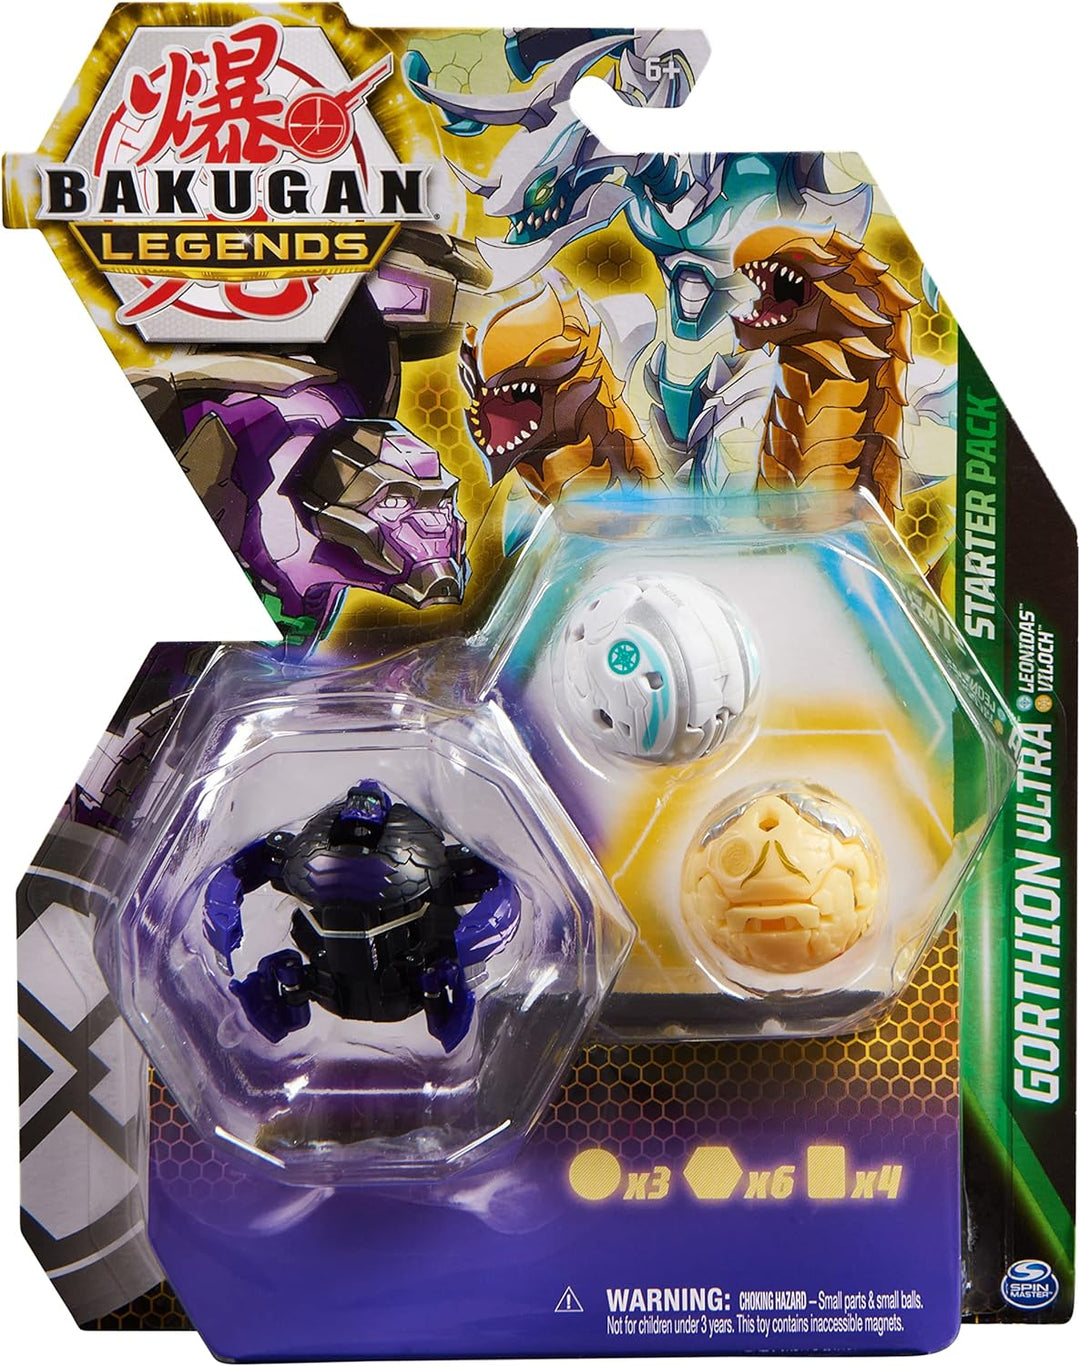 BAKUGAN Legends Starter Pack 3-Pack, Gorthion Ultra with Leonidas and Viloch, Co